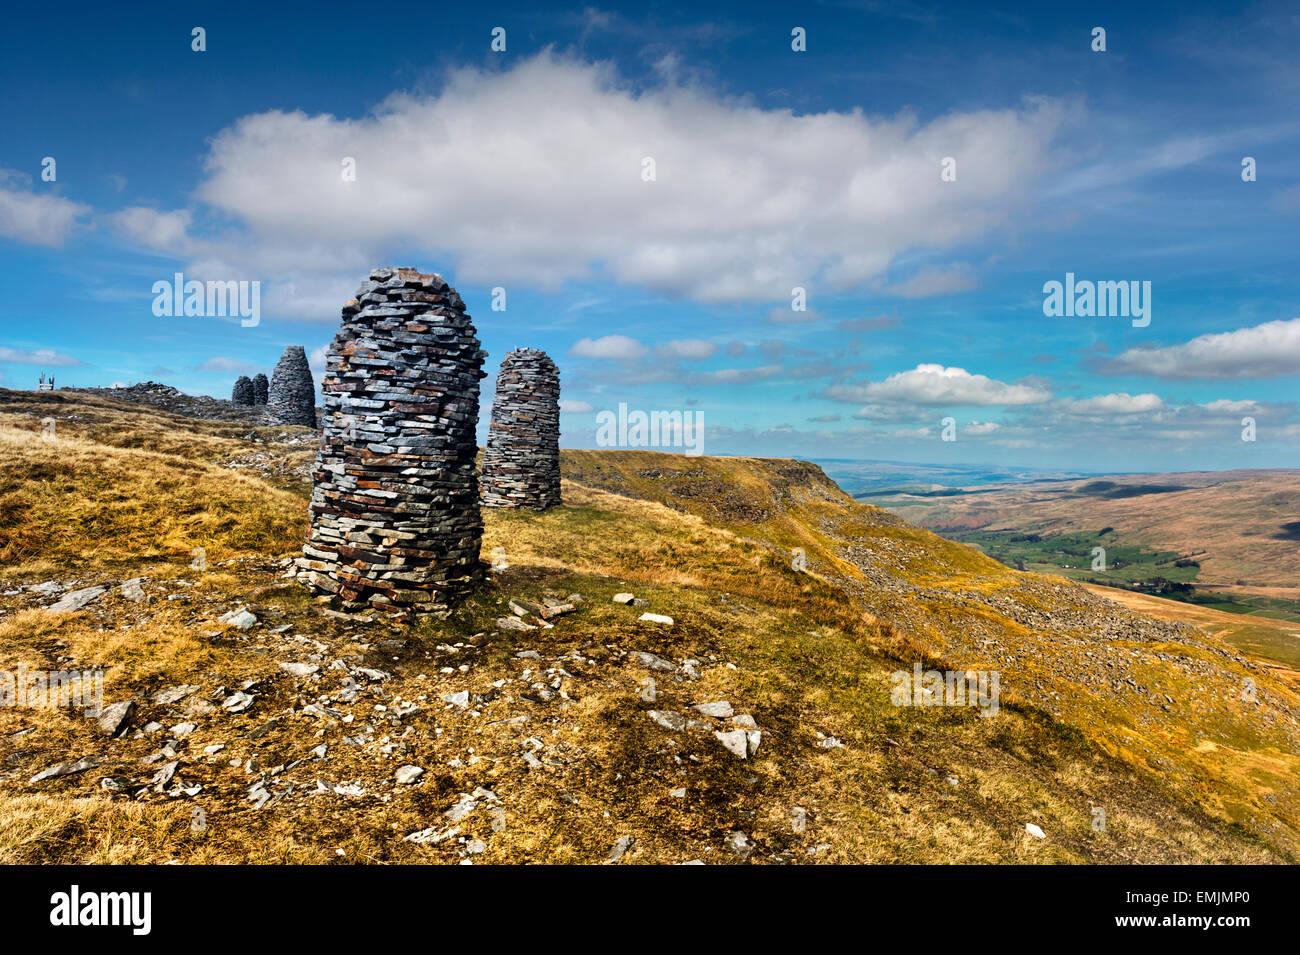 Wild Boar Fell, near Kirkby Stephen, Eden Valley, Cumbria, UK, with stone cairns. A popular destination for walkers. Stock Photo